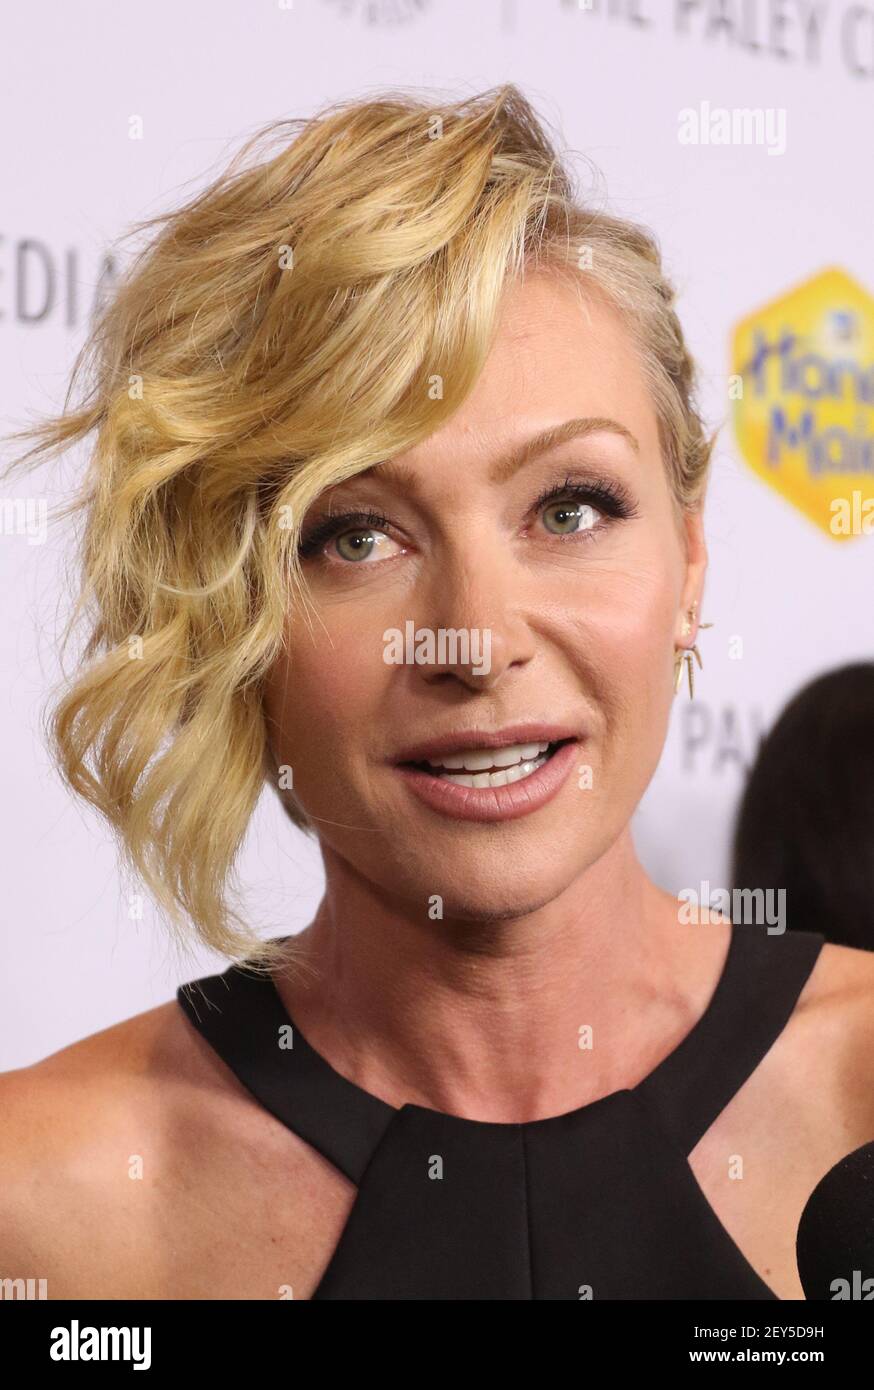 12 November 2014 - Los Angeles, Portia de Rossi. The Paley Center's Annual Los Angeles Gala Celebrating Television's Impact On LGBT Equality Held at The Skirball Cultural Center. Photo Credit: F.Sadou/AdMedia/Sipa USA Stock Photo